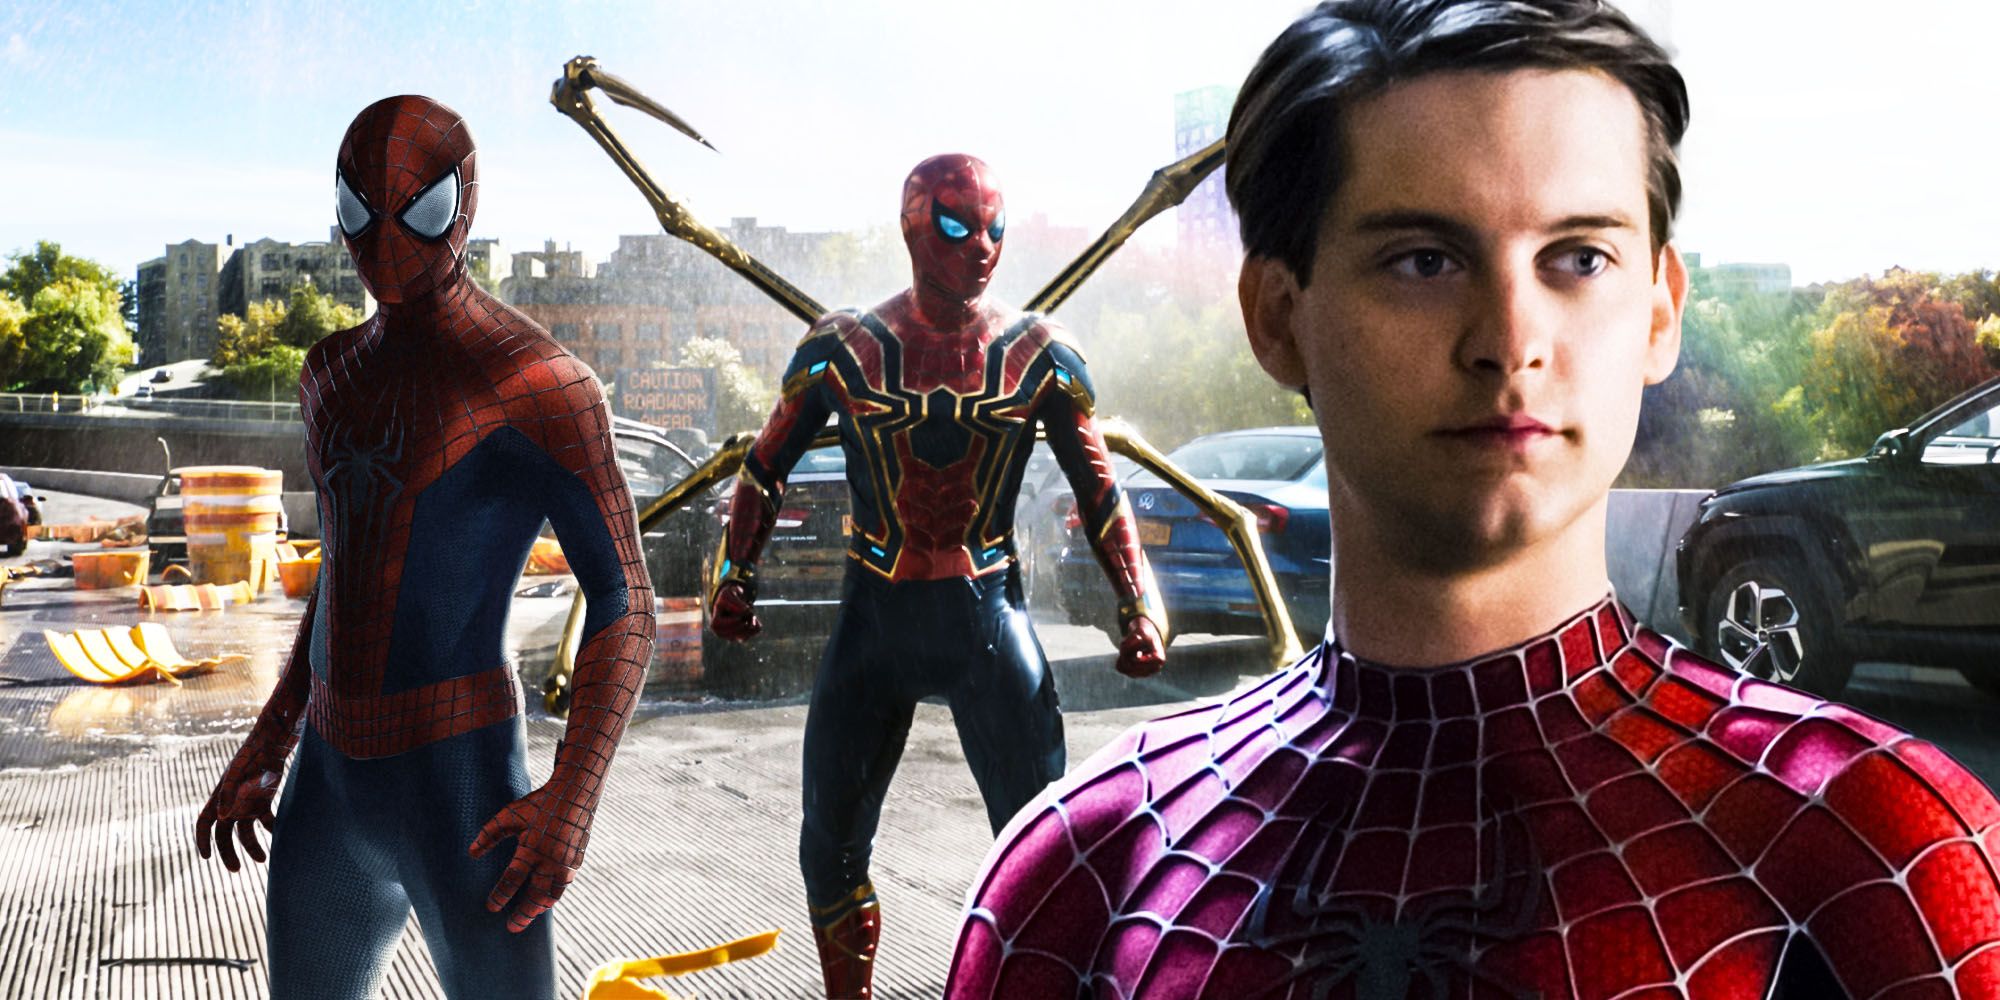 next Spiderman no way home trailer must show tobey maguire and andrew garfield